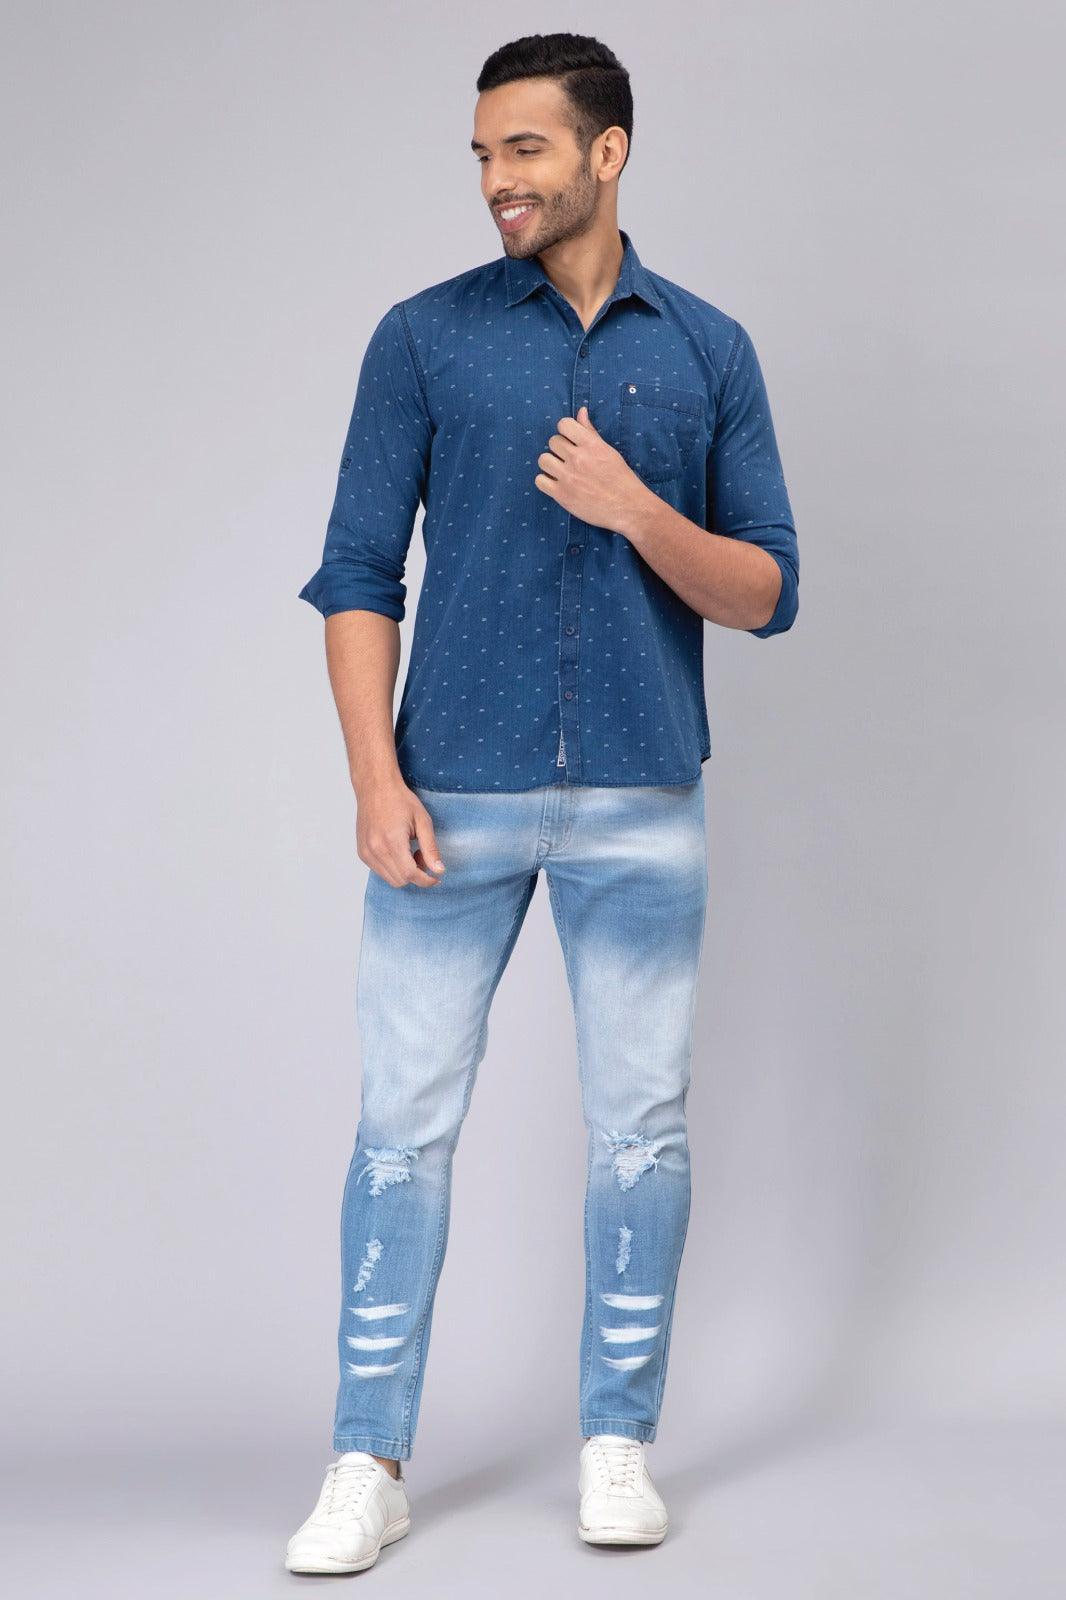 Men's Denim Jeans: Buy Stylish Stretchable and Regular Fit Cotton Jeans in  India